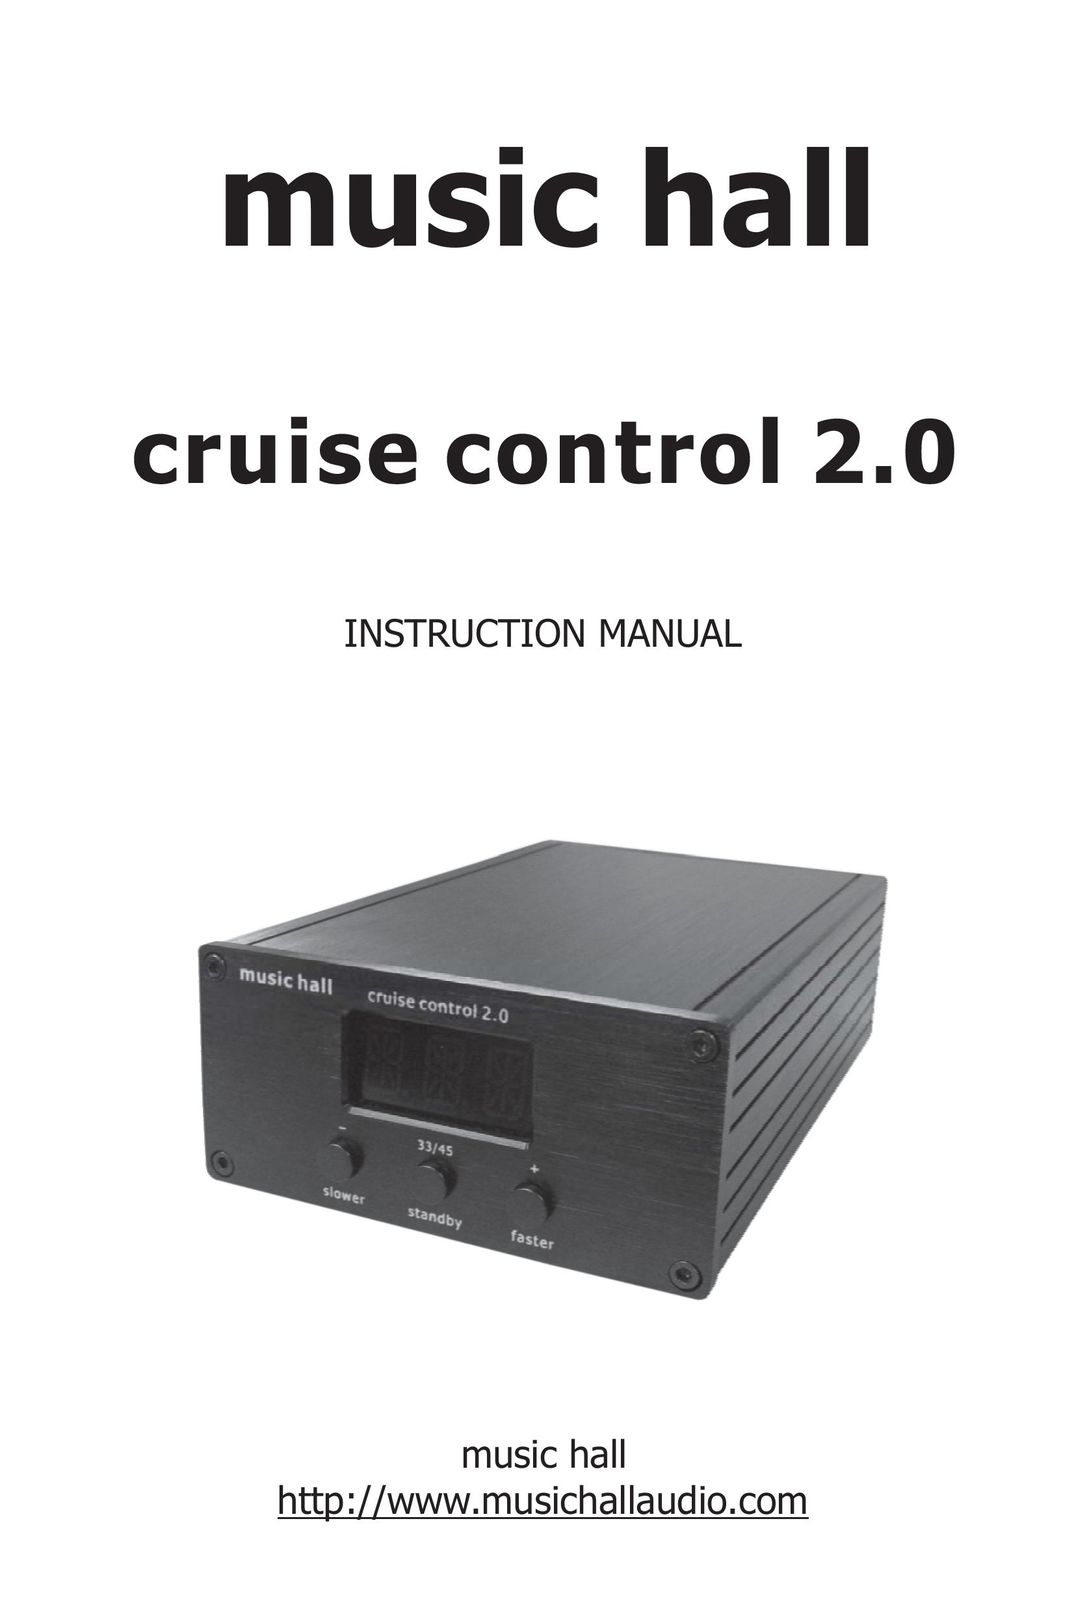 Music Hall Cruise Control 2.0 Portable Multimedia Player User Manual